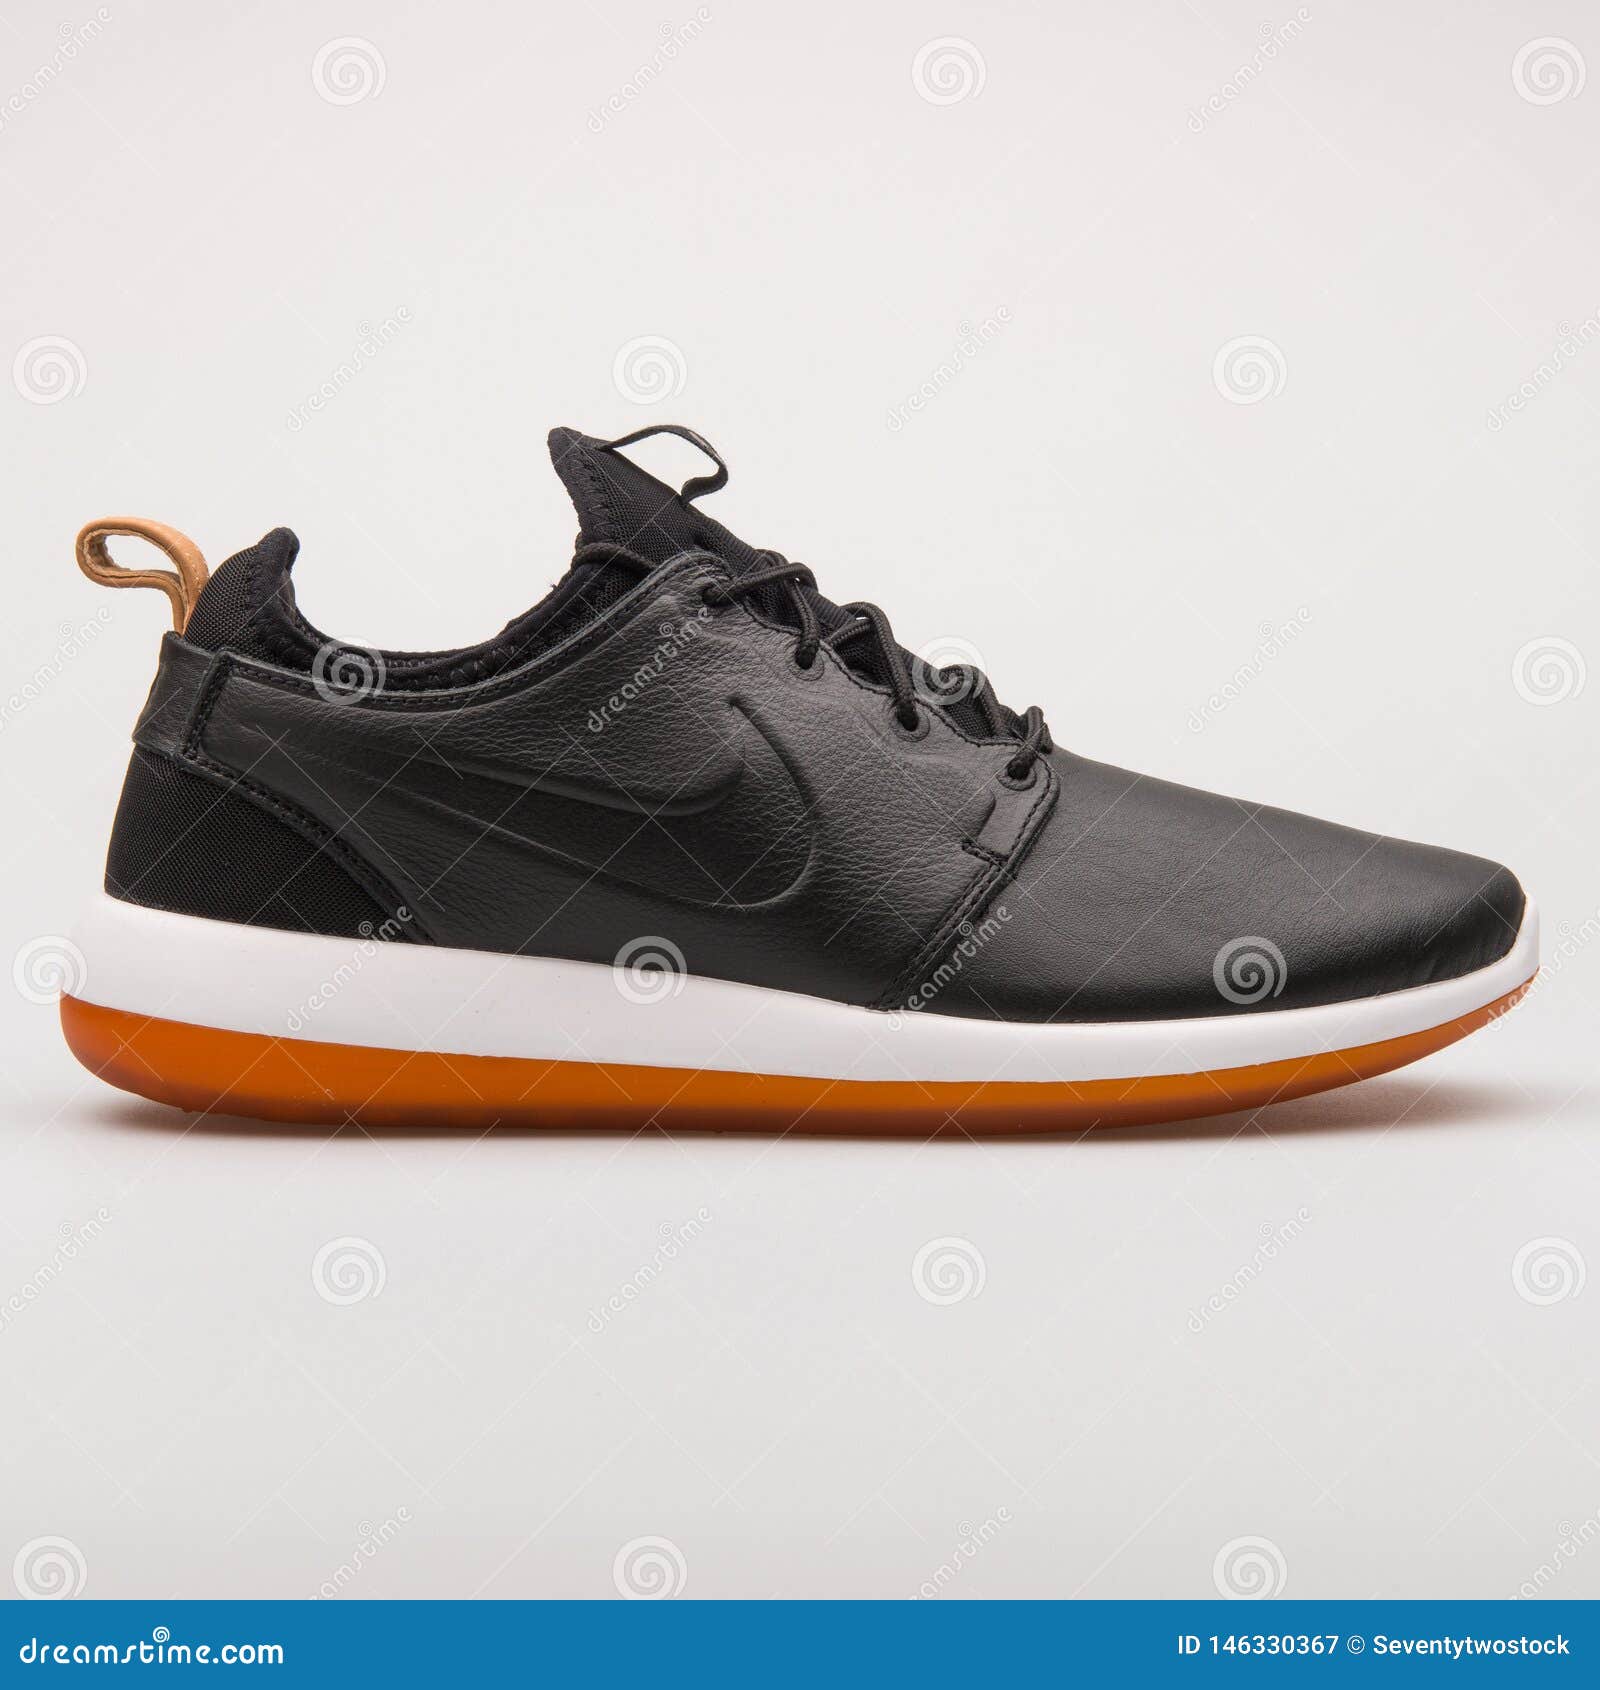 Nike Roshe Two Leather Premium Black Sneaker Editorial Photography - Image of life, 146330367